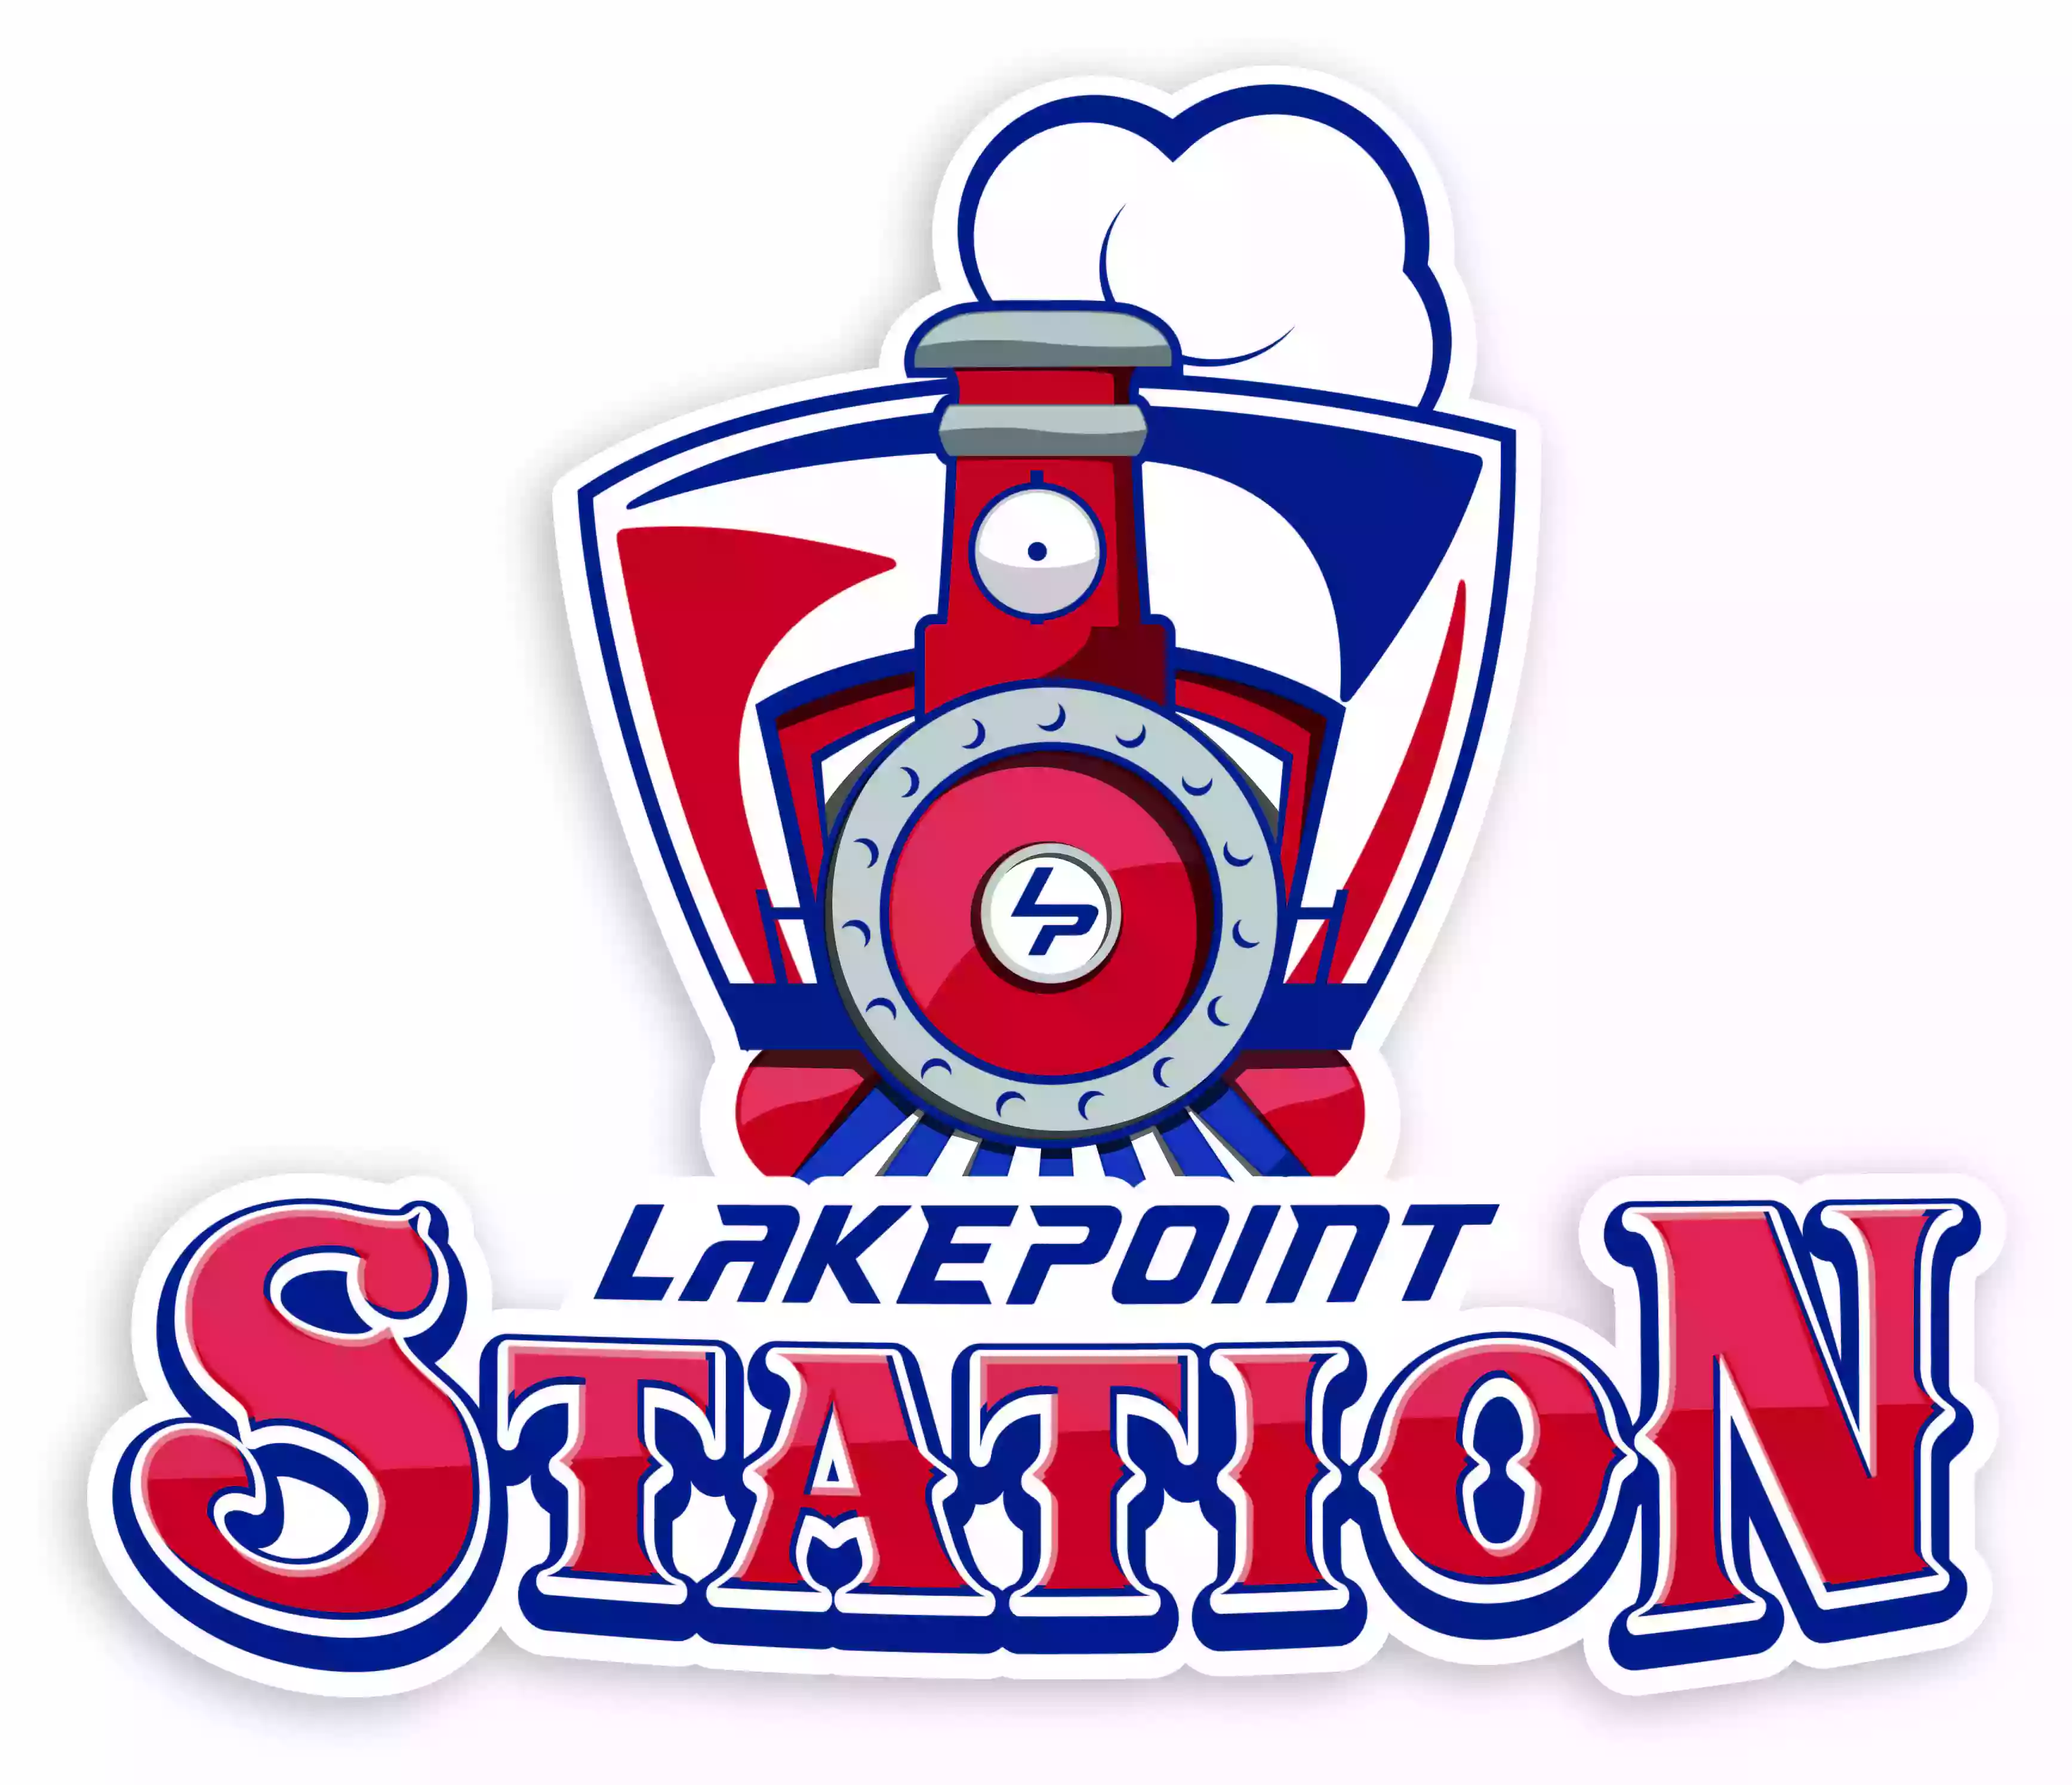 Lakepoint Station